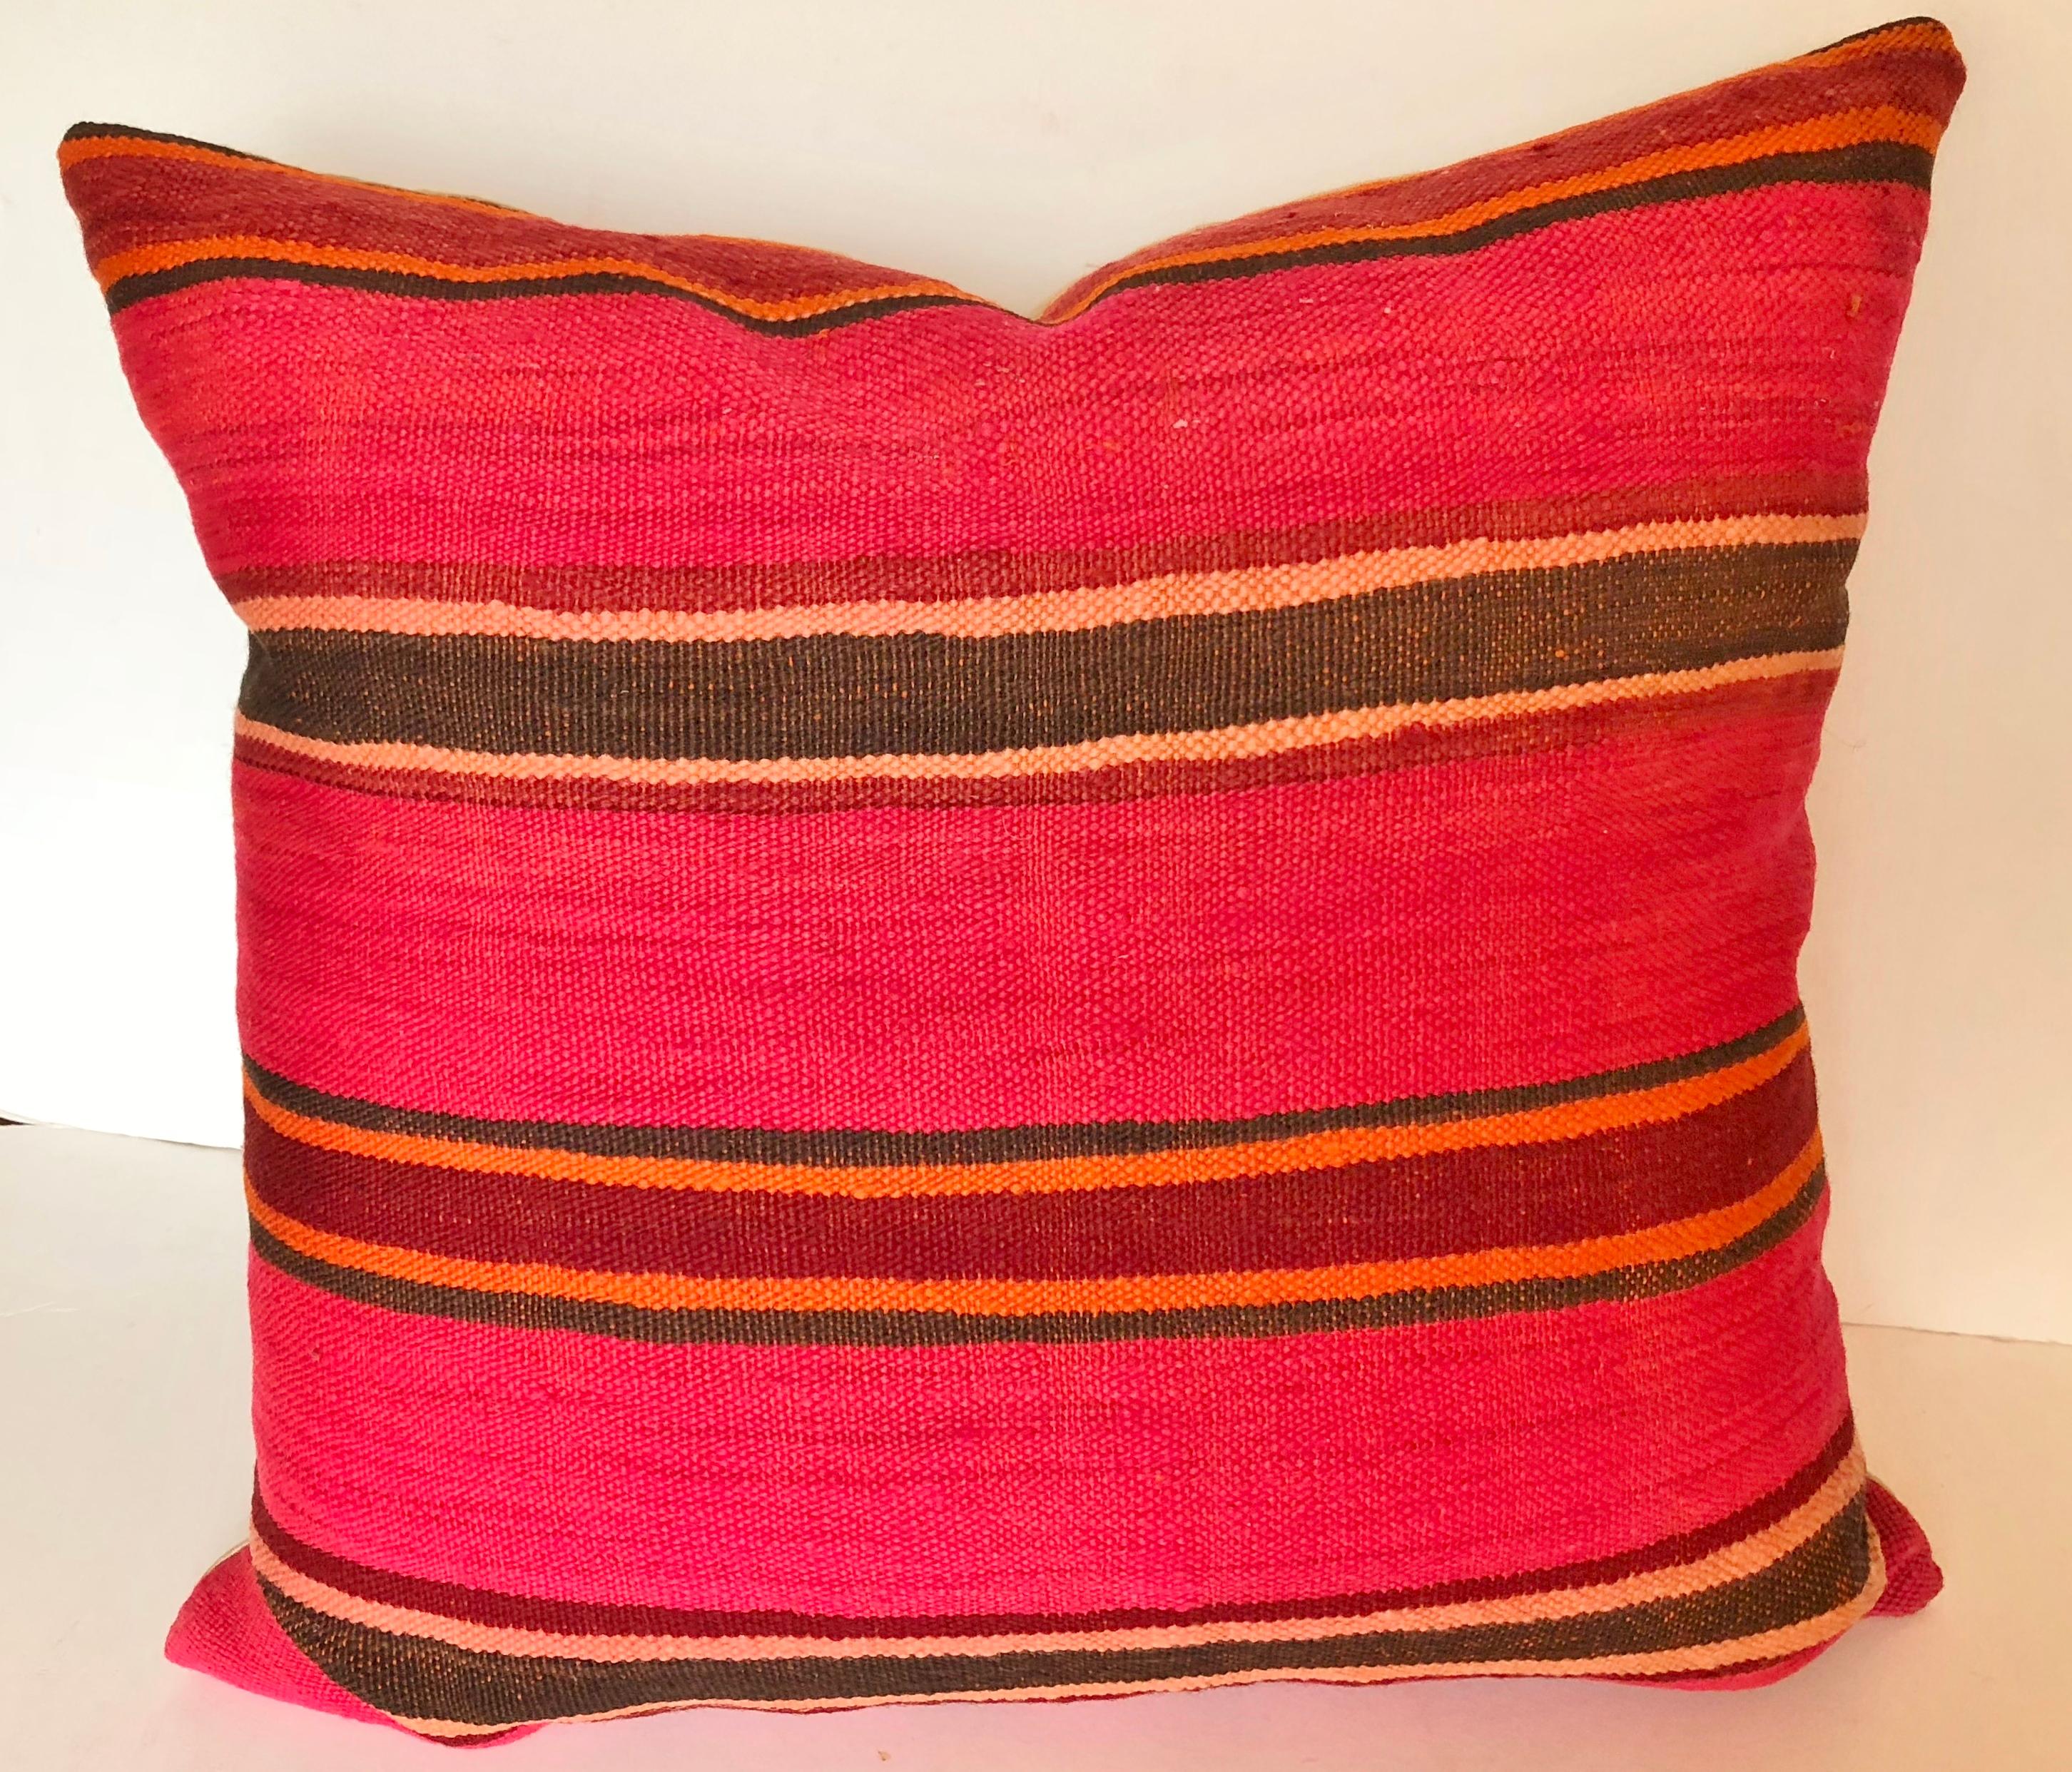 Custom pillow cut from a vintage Moroccan hand loomed wool Berber rug from the Atlas Mountains. Wool is soft with deep pink stripes. Pillow is backed in ivory silk, filled with an insert of 50/50 down and feathers and hand sewn closed. We make all